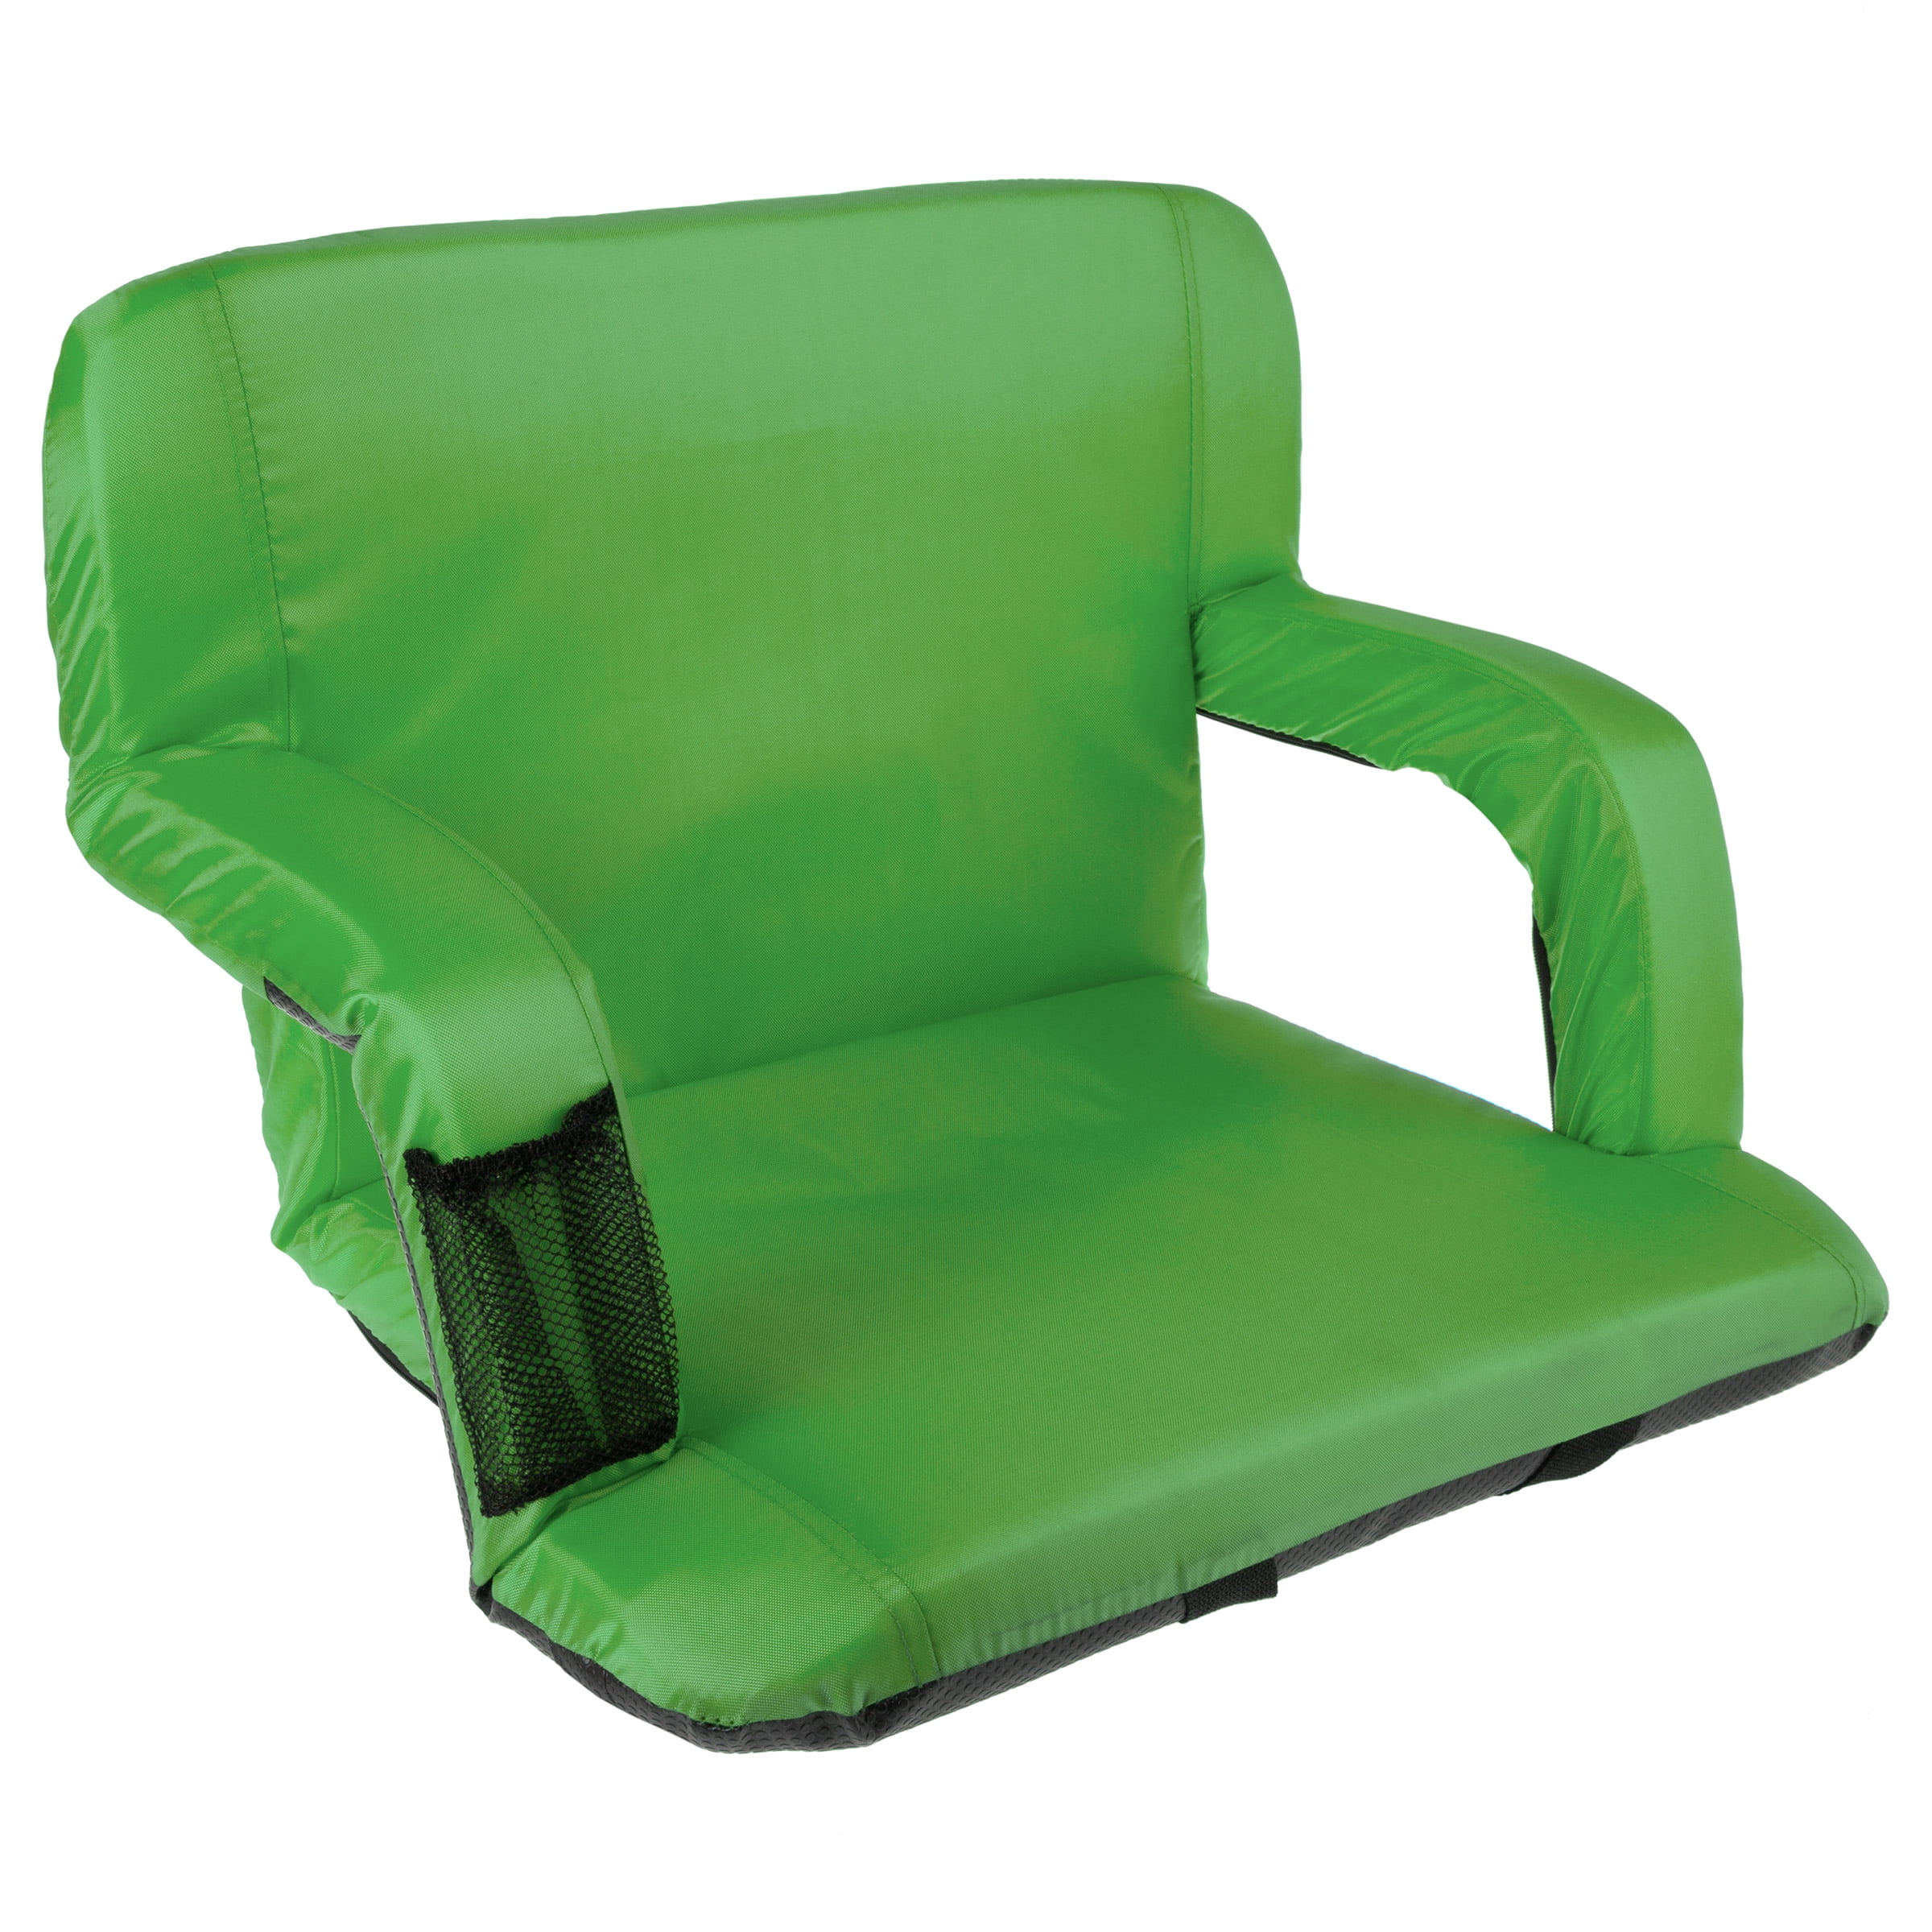 Portable Wide Stadium Seats for Bleachers with Back Support and Padded Cushion